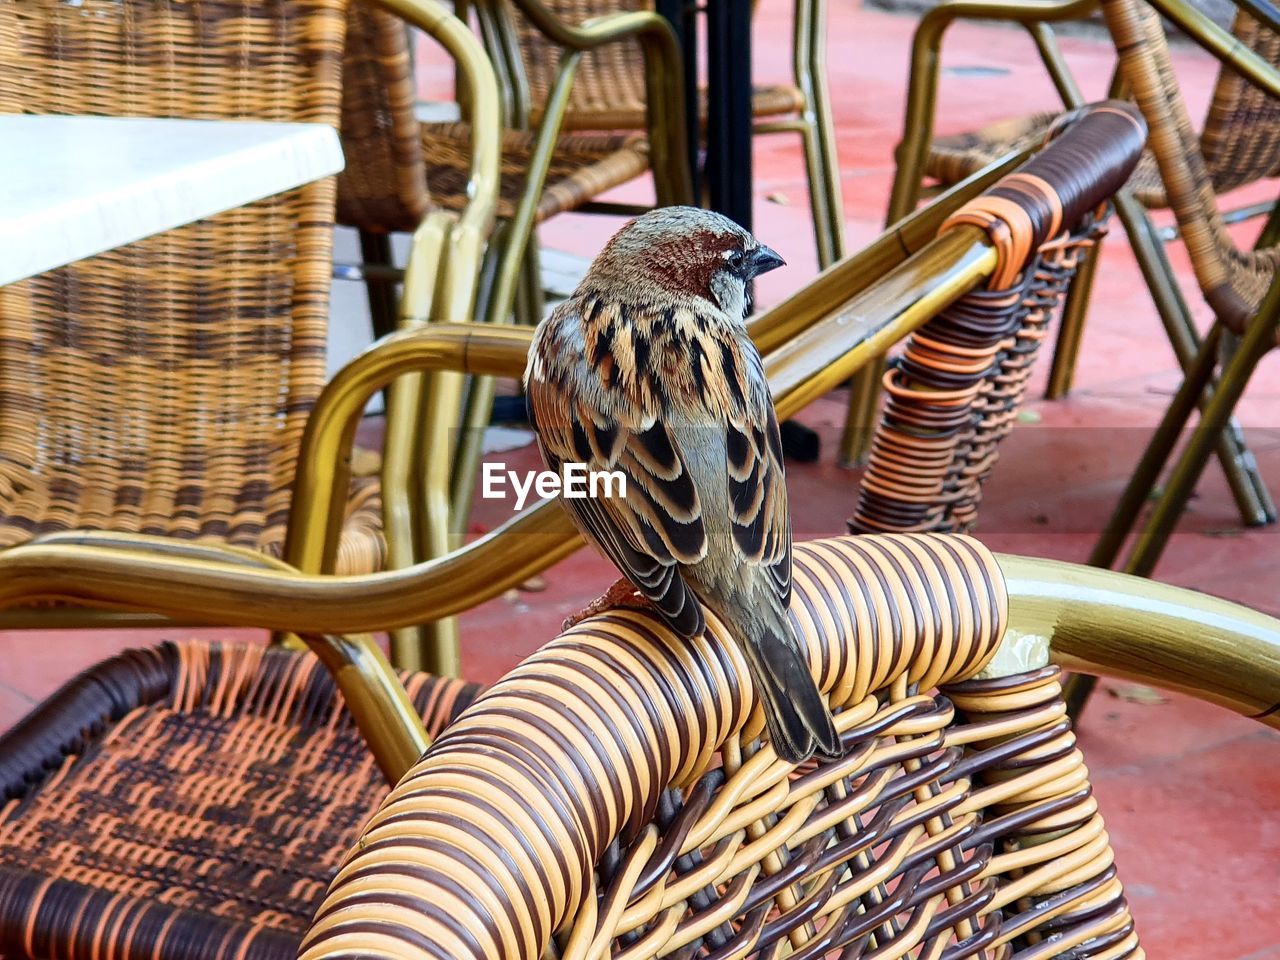 CLOSE-UP OF A BIRD IN BASKET